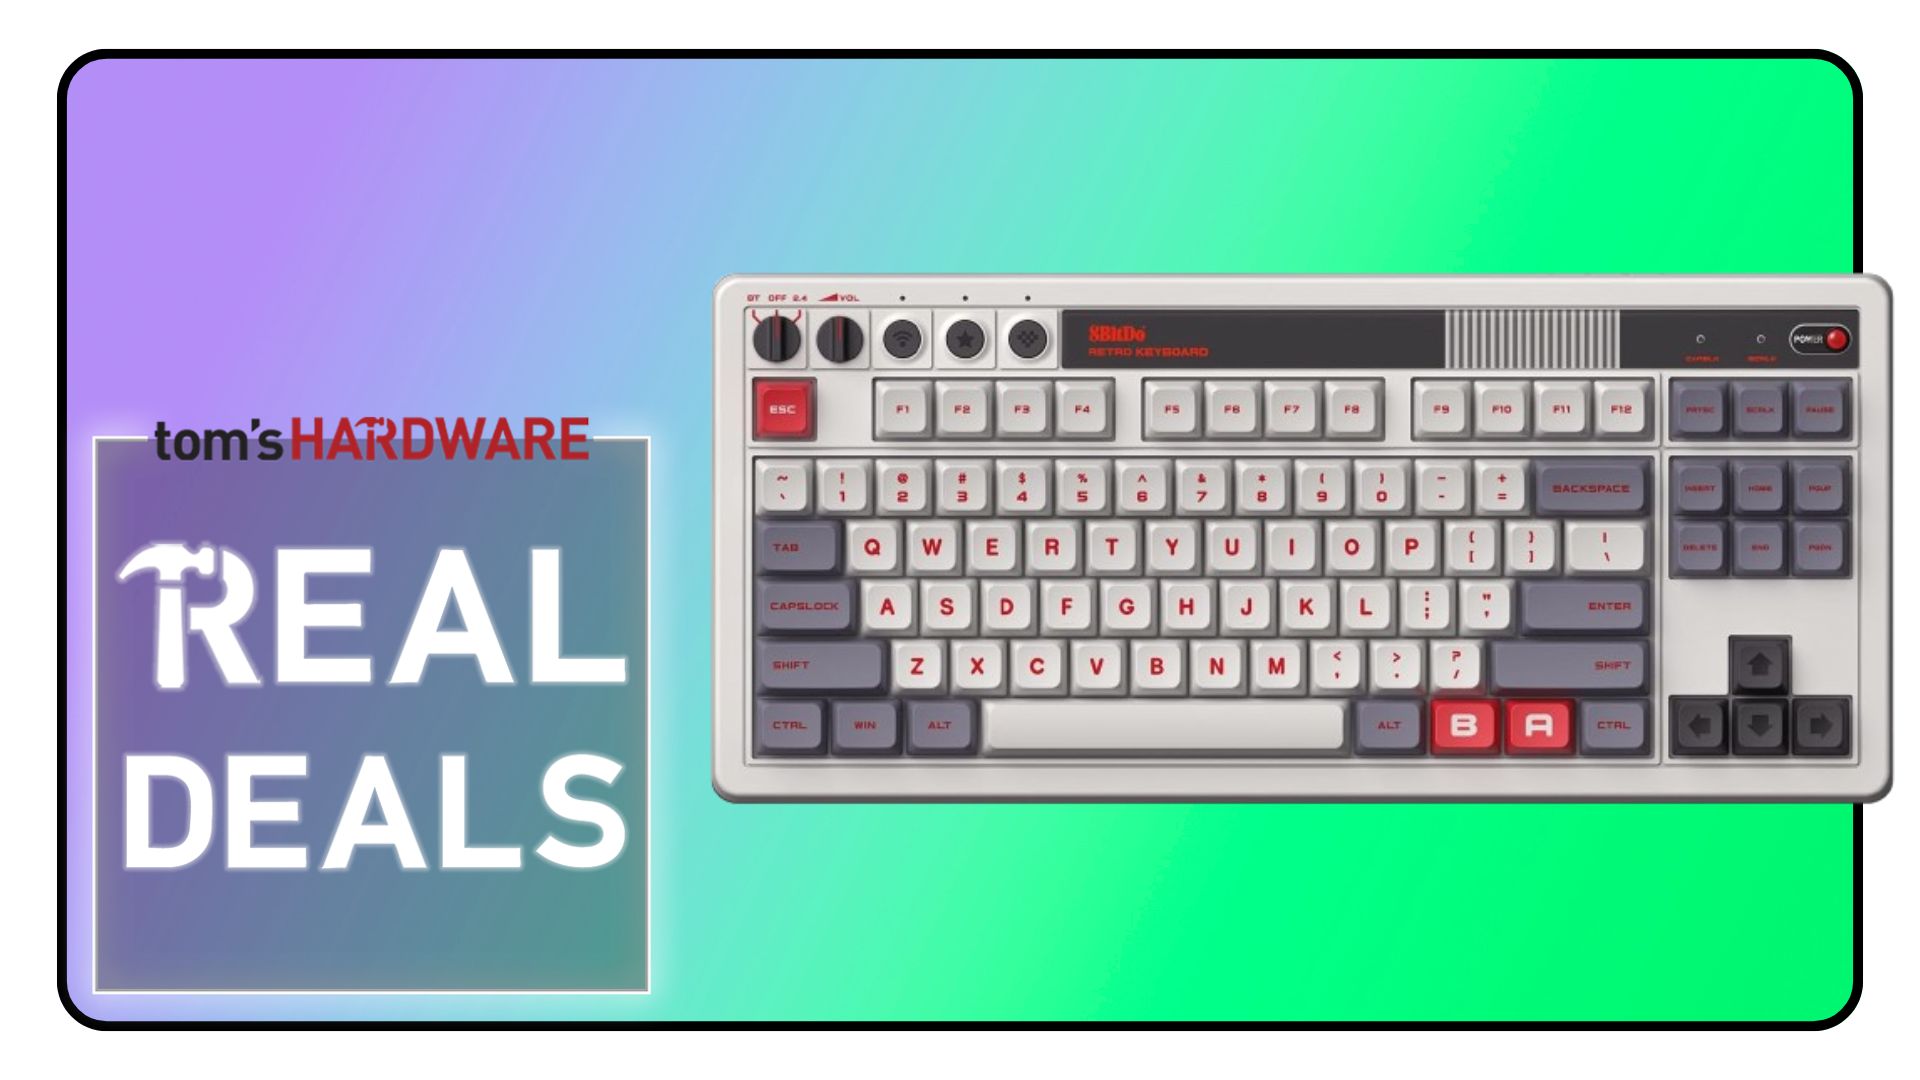 Grab this cool retro console inspired keyboard for just $83